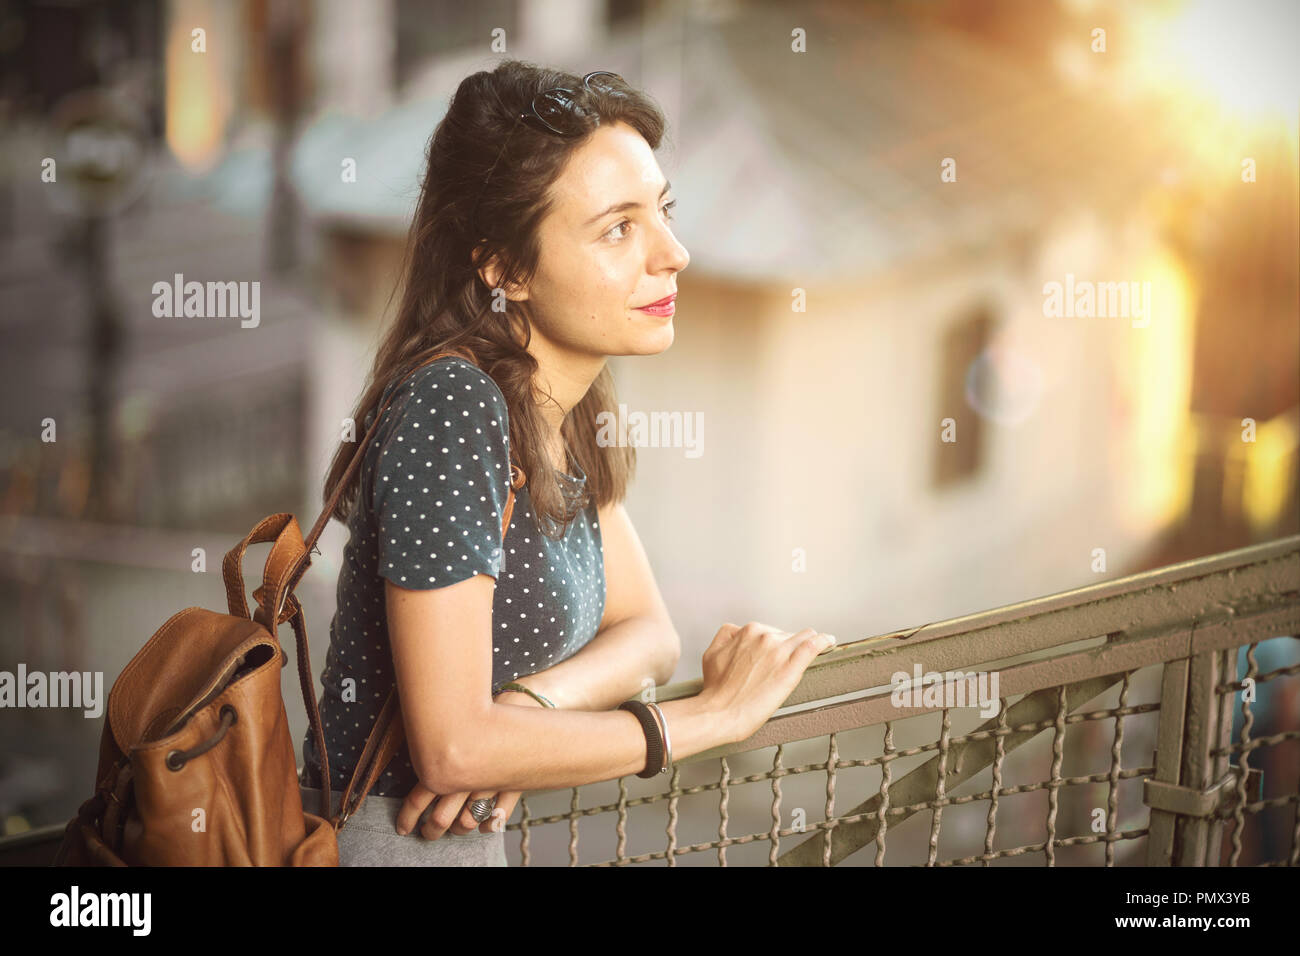 Contemplative young woman leaning on a banister Stock Photo